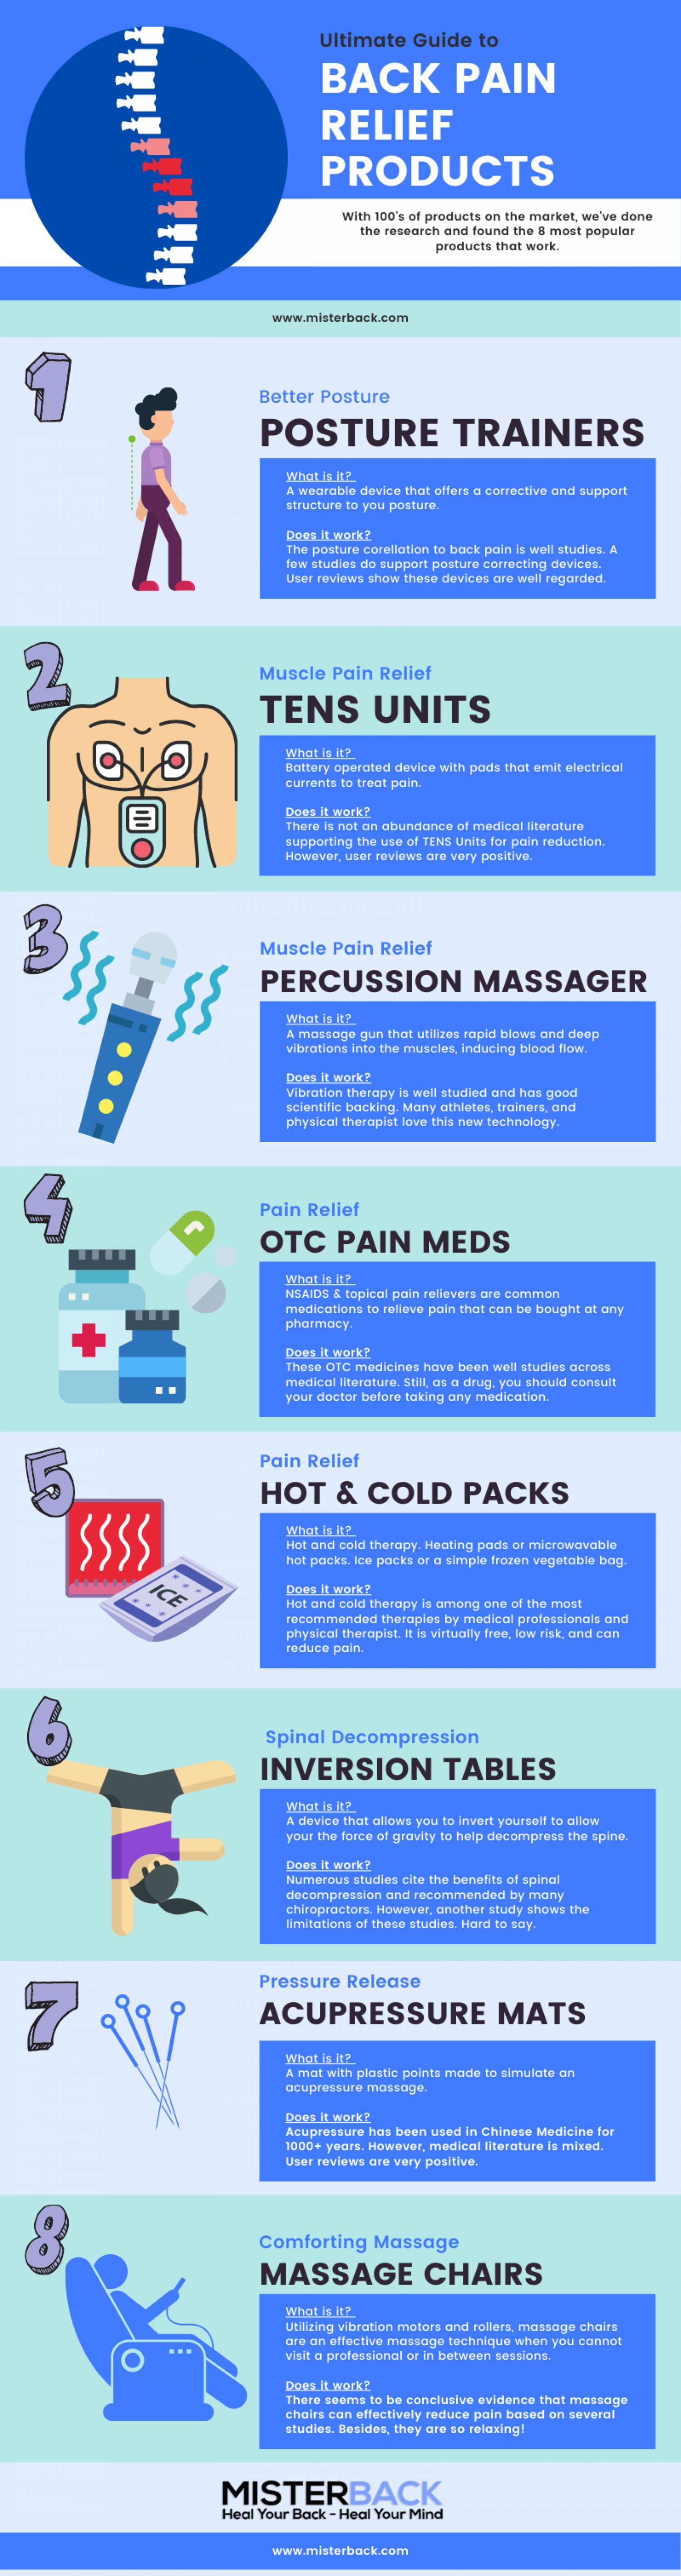 Ultimate Guide to Back Pain Relief Products that Work Infographic